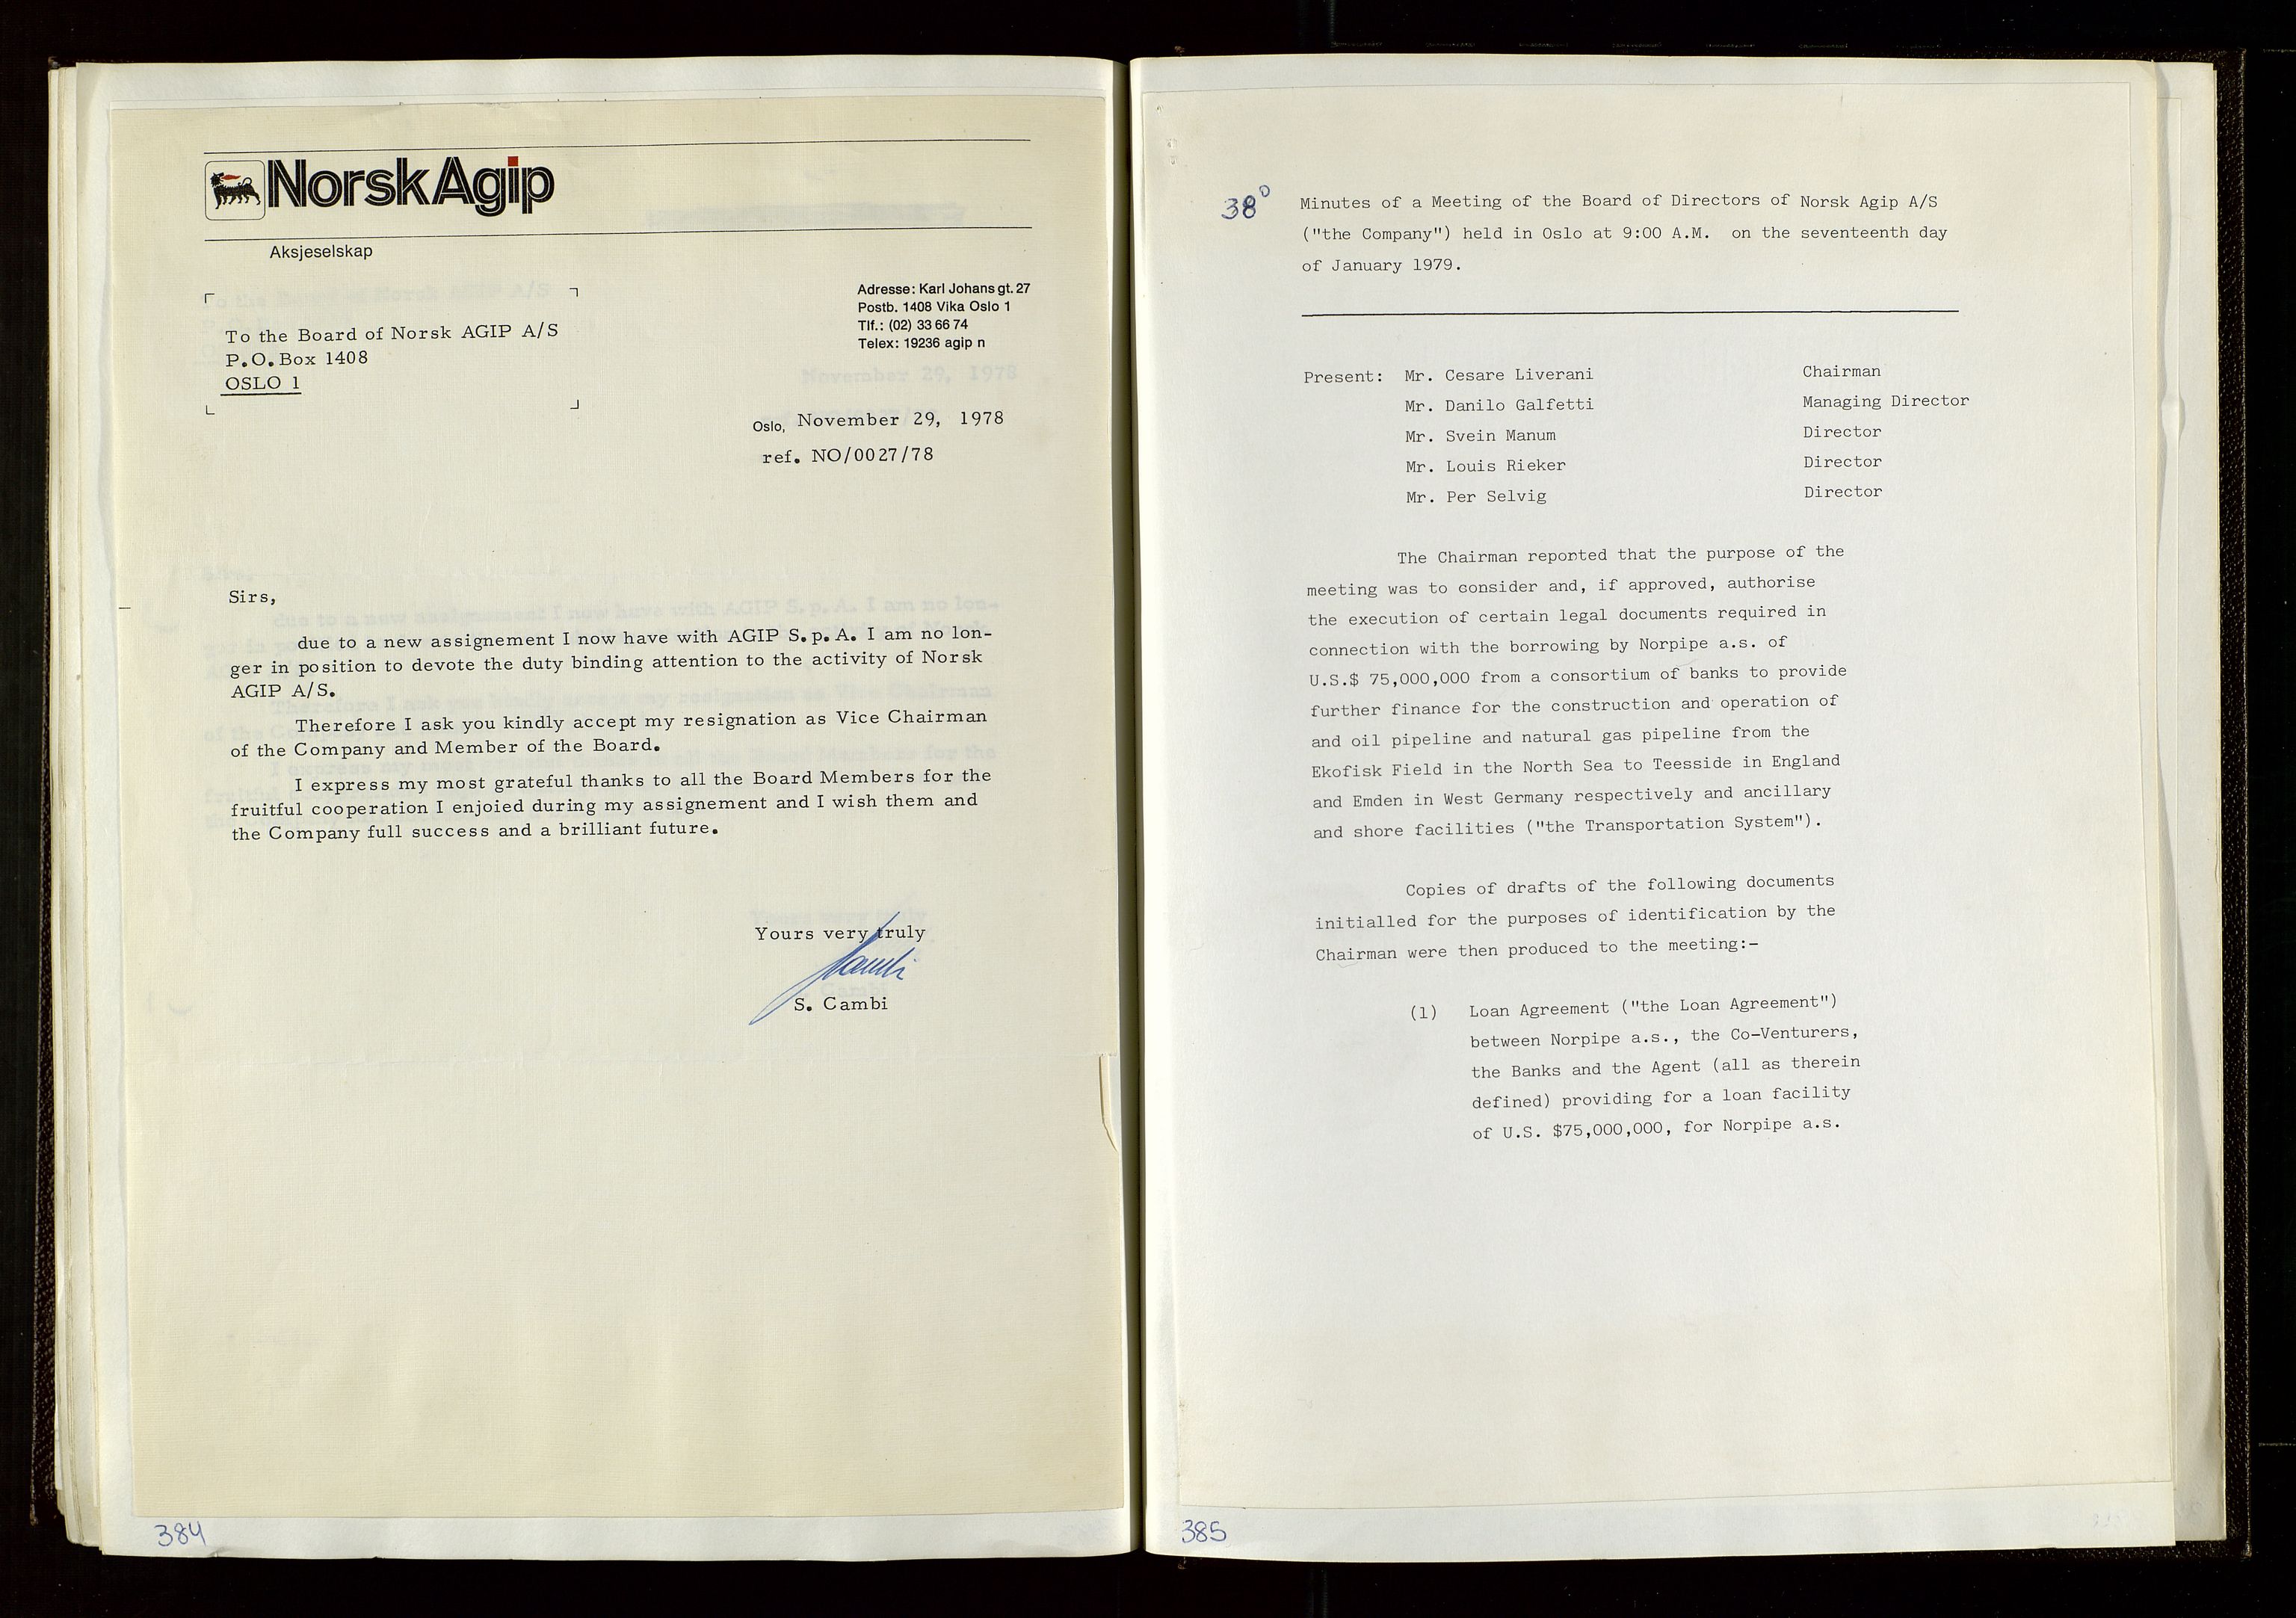 Pa 1583 - Norsk Agip AS, SAST/A-102138/A/Aa/L0002: General assembly and Board of Directors meeting minutes, 1972-1979, s. 384-385